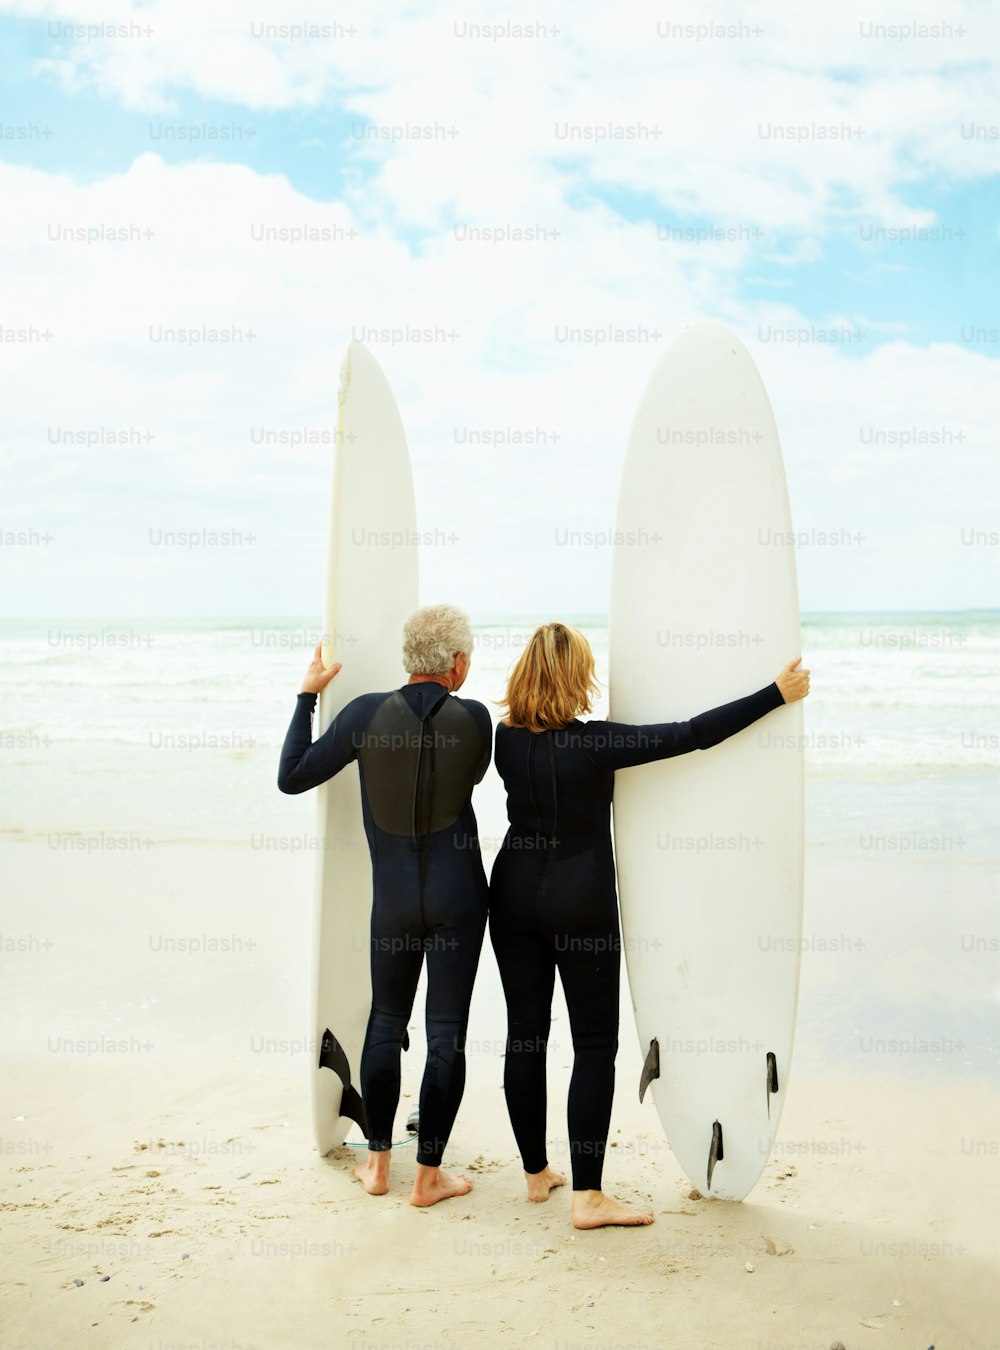 Rearview of an older couple in wetsuits standing with their surfboards